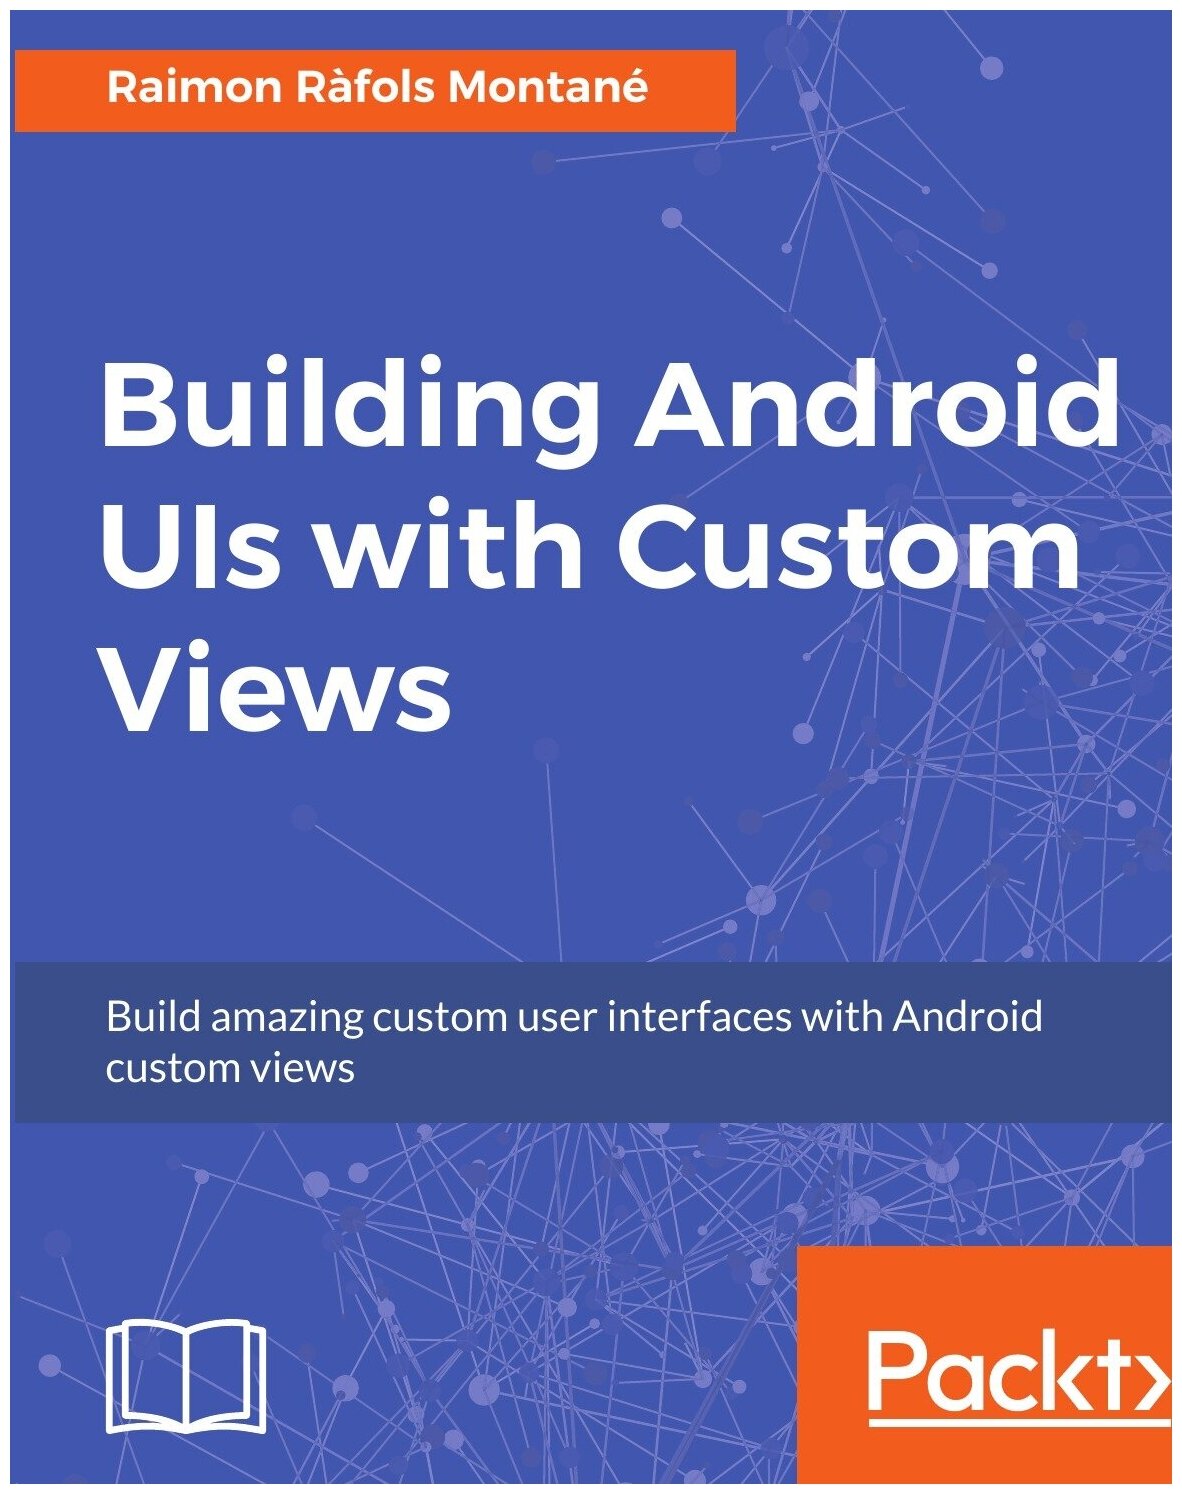 Building Android UIs with Custom Views